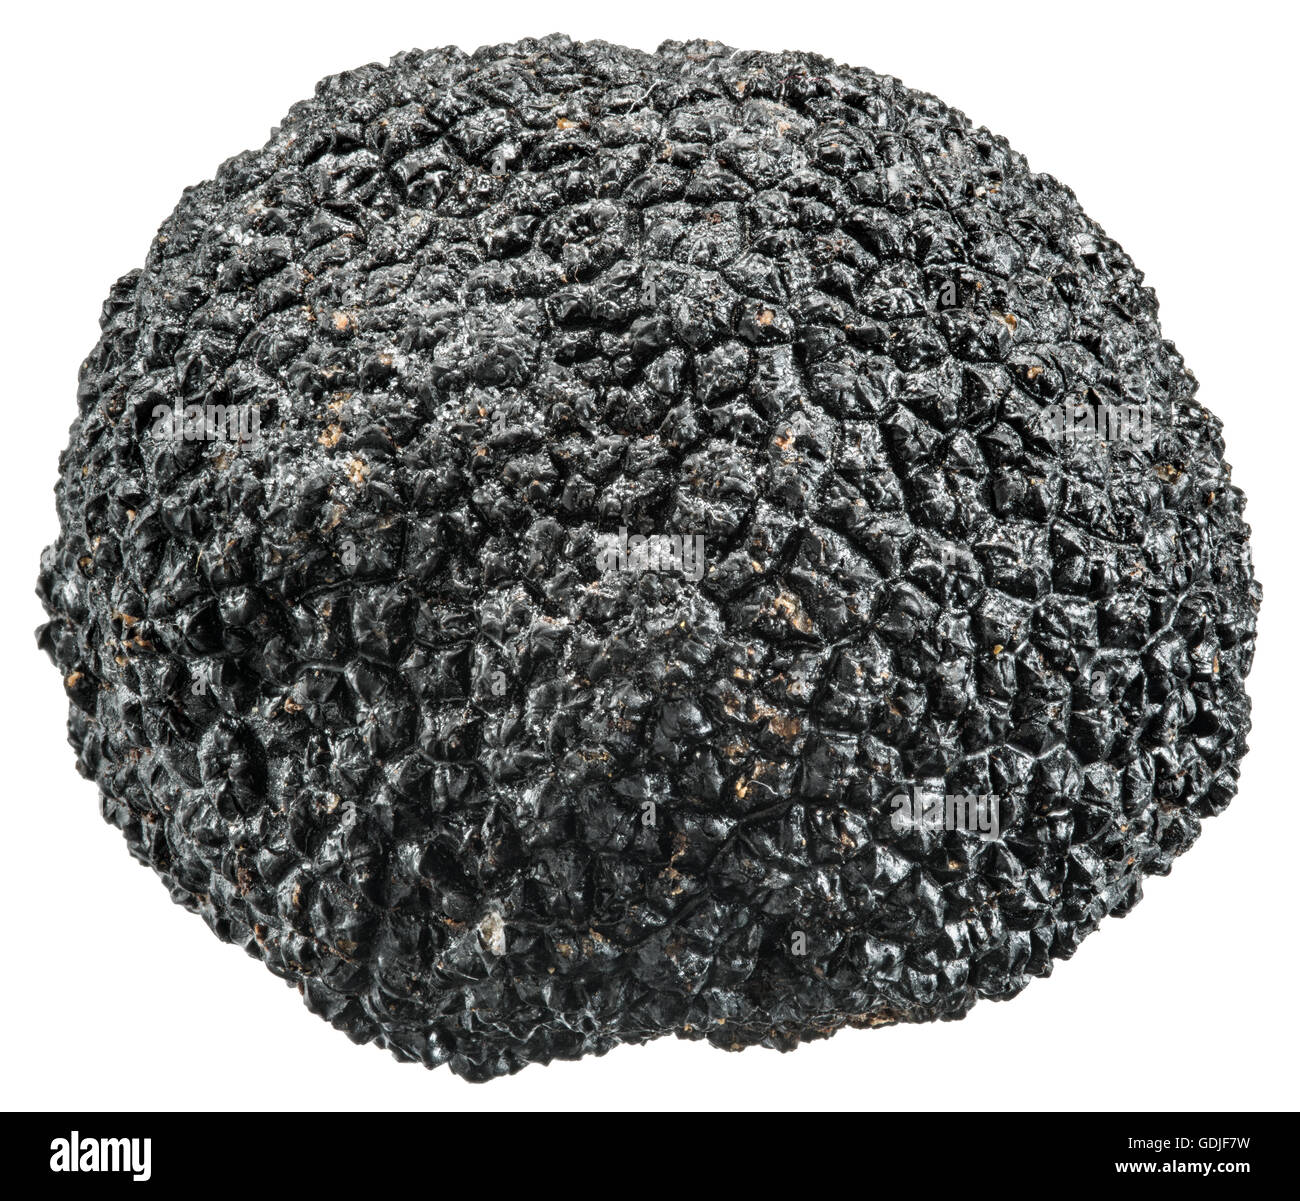 Black truffle. File contains clipping paths. Stock Photo